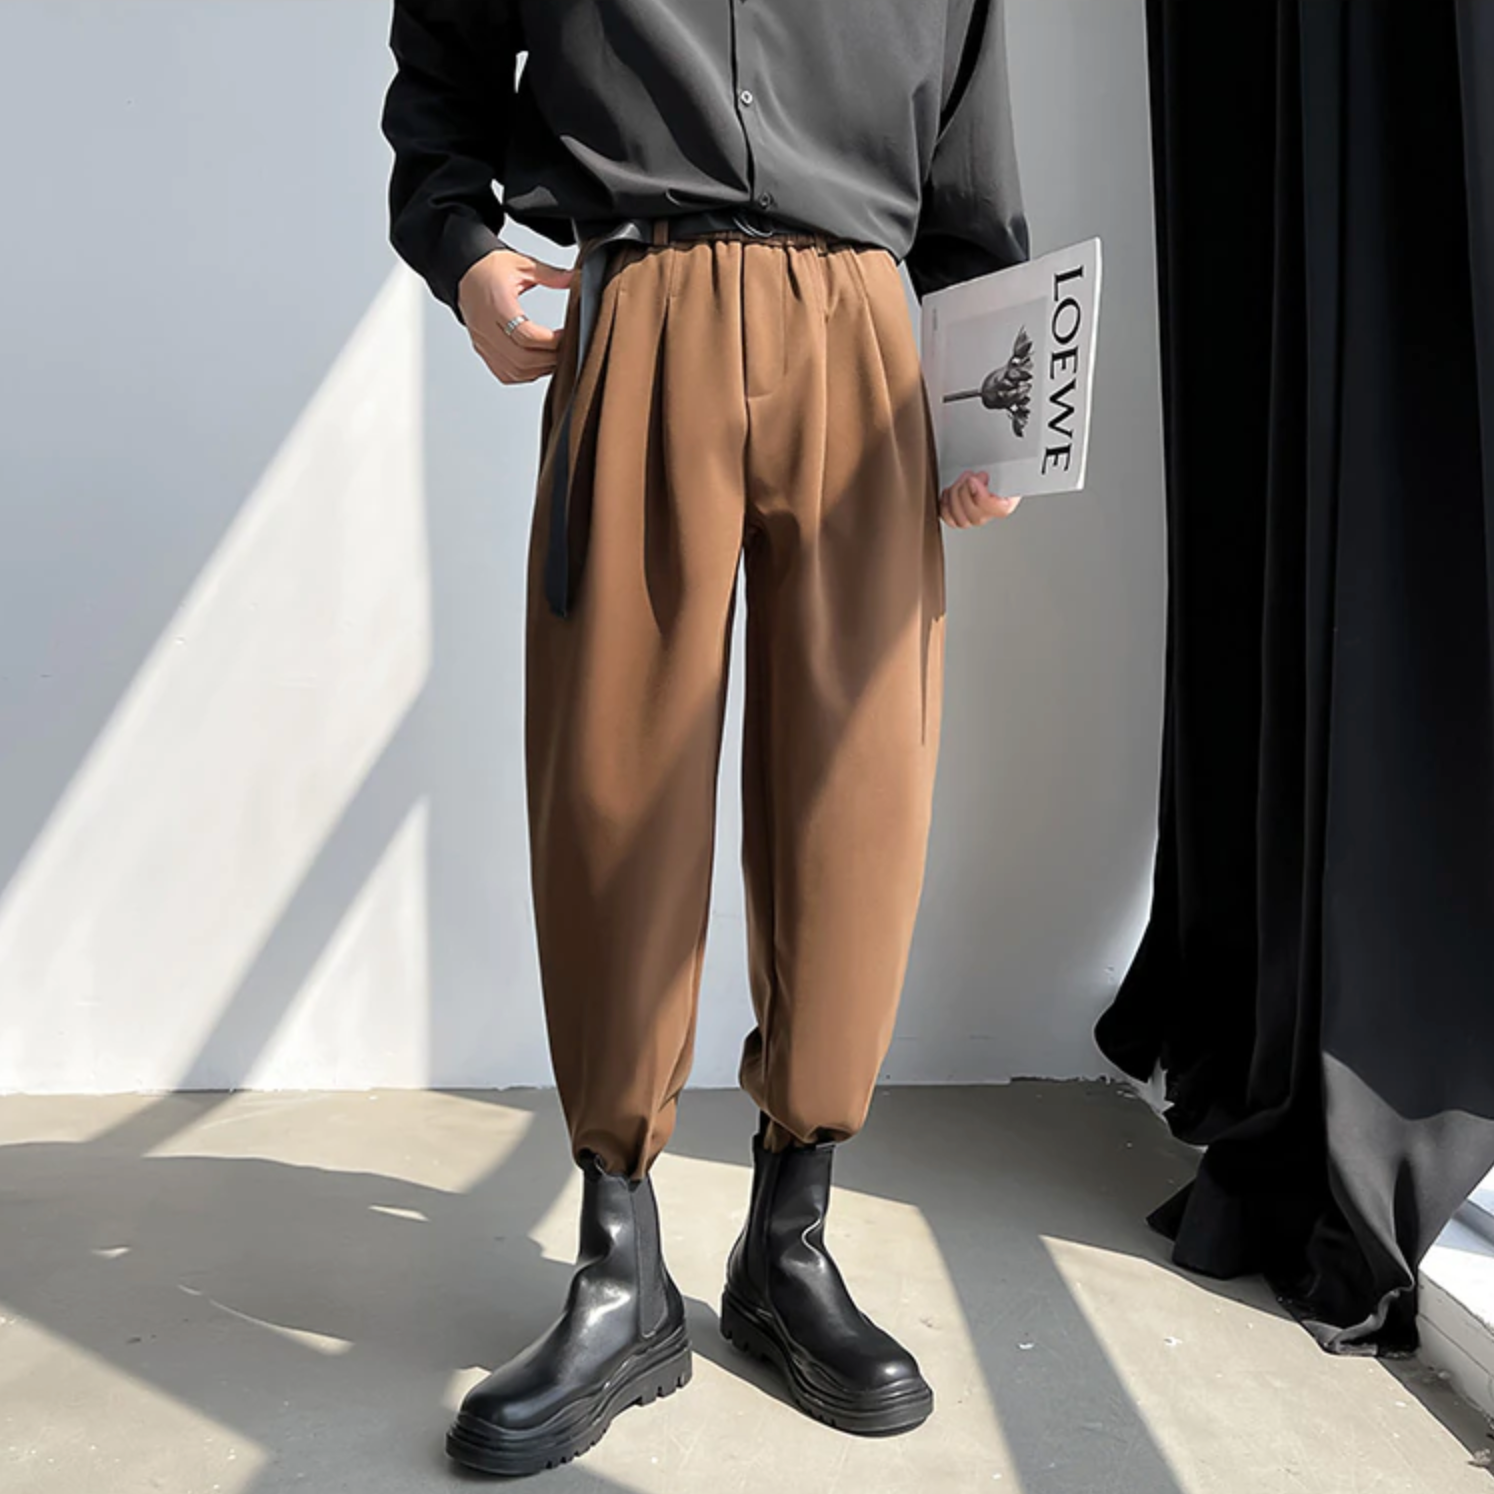 How to style flare pants according to Korean Fashion?